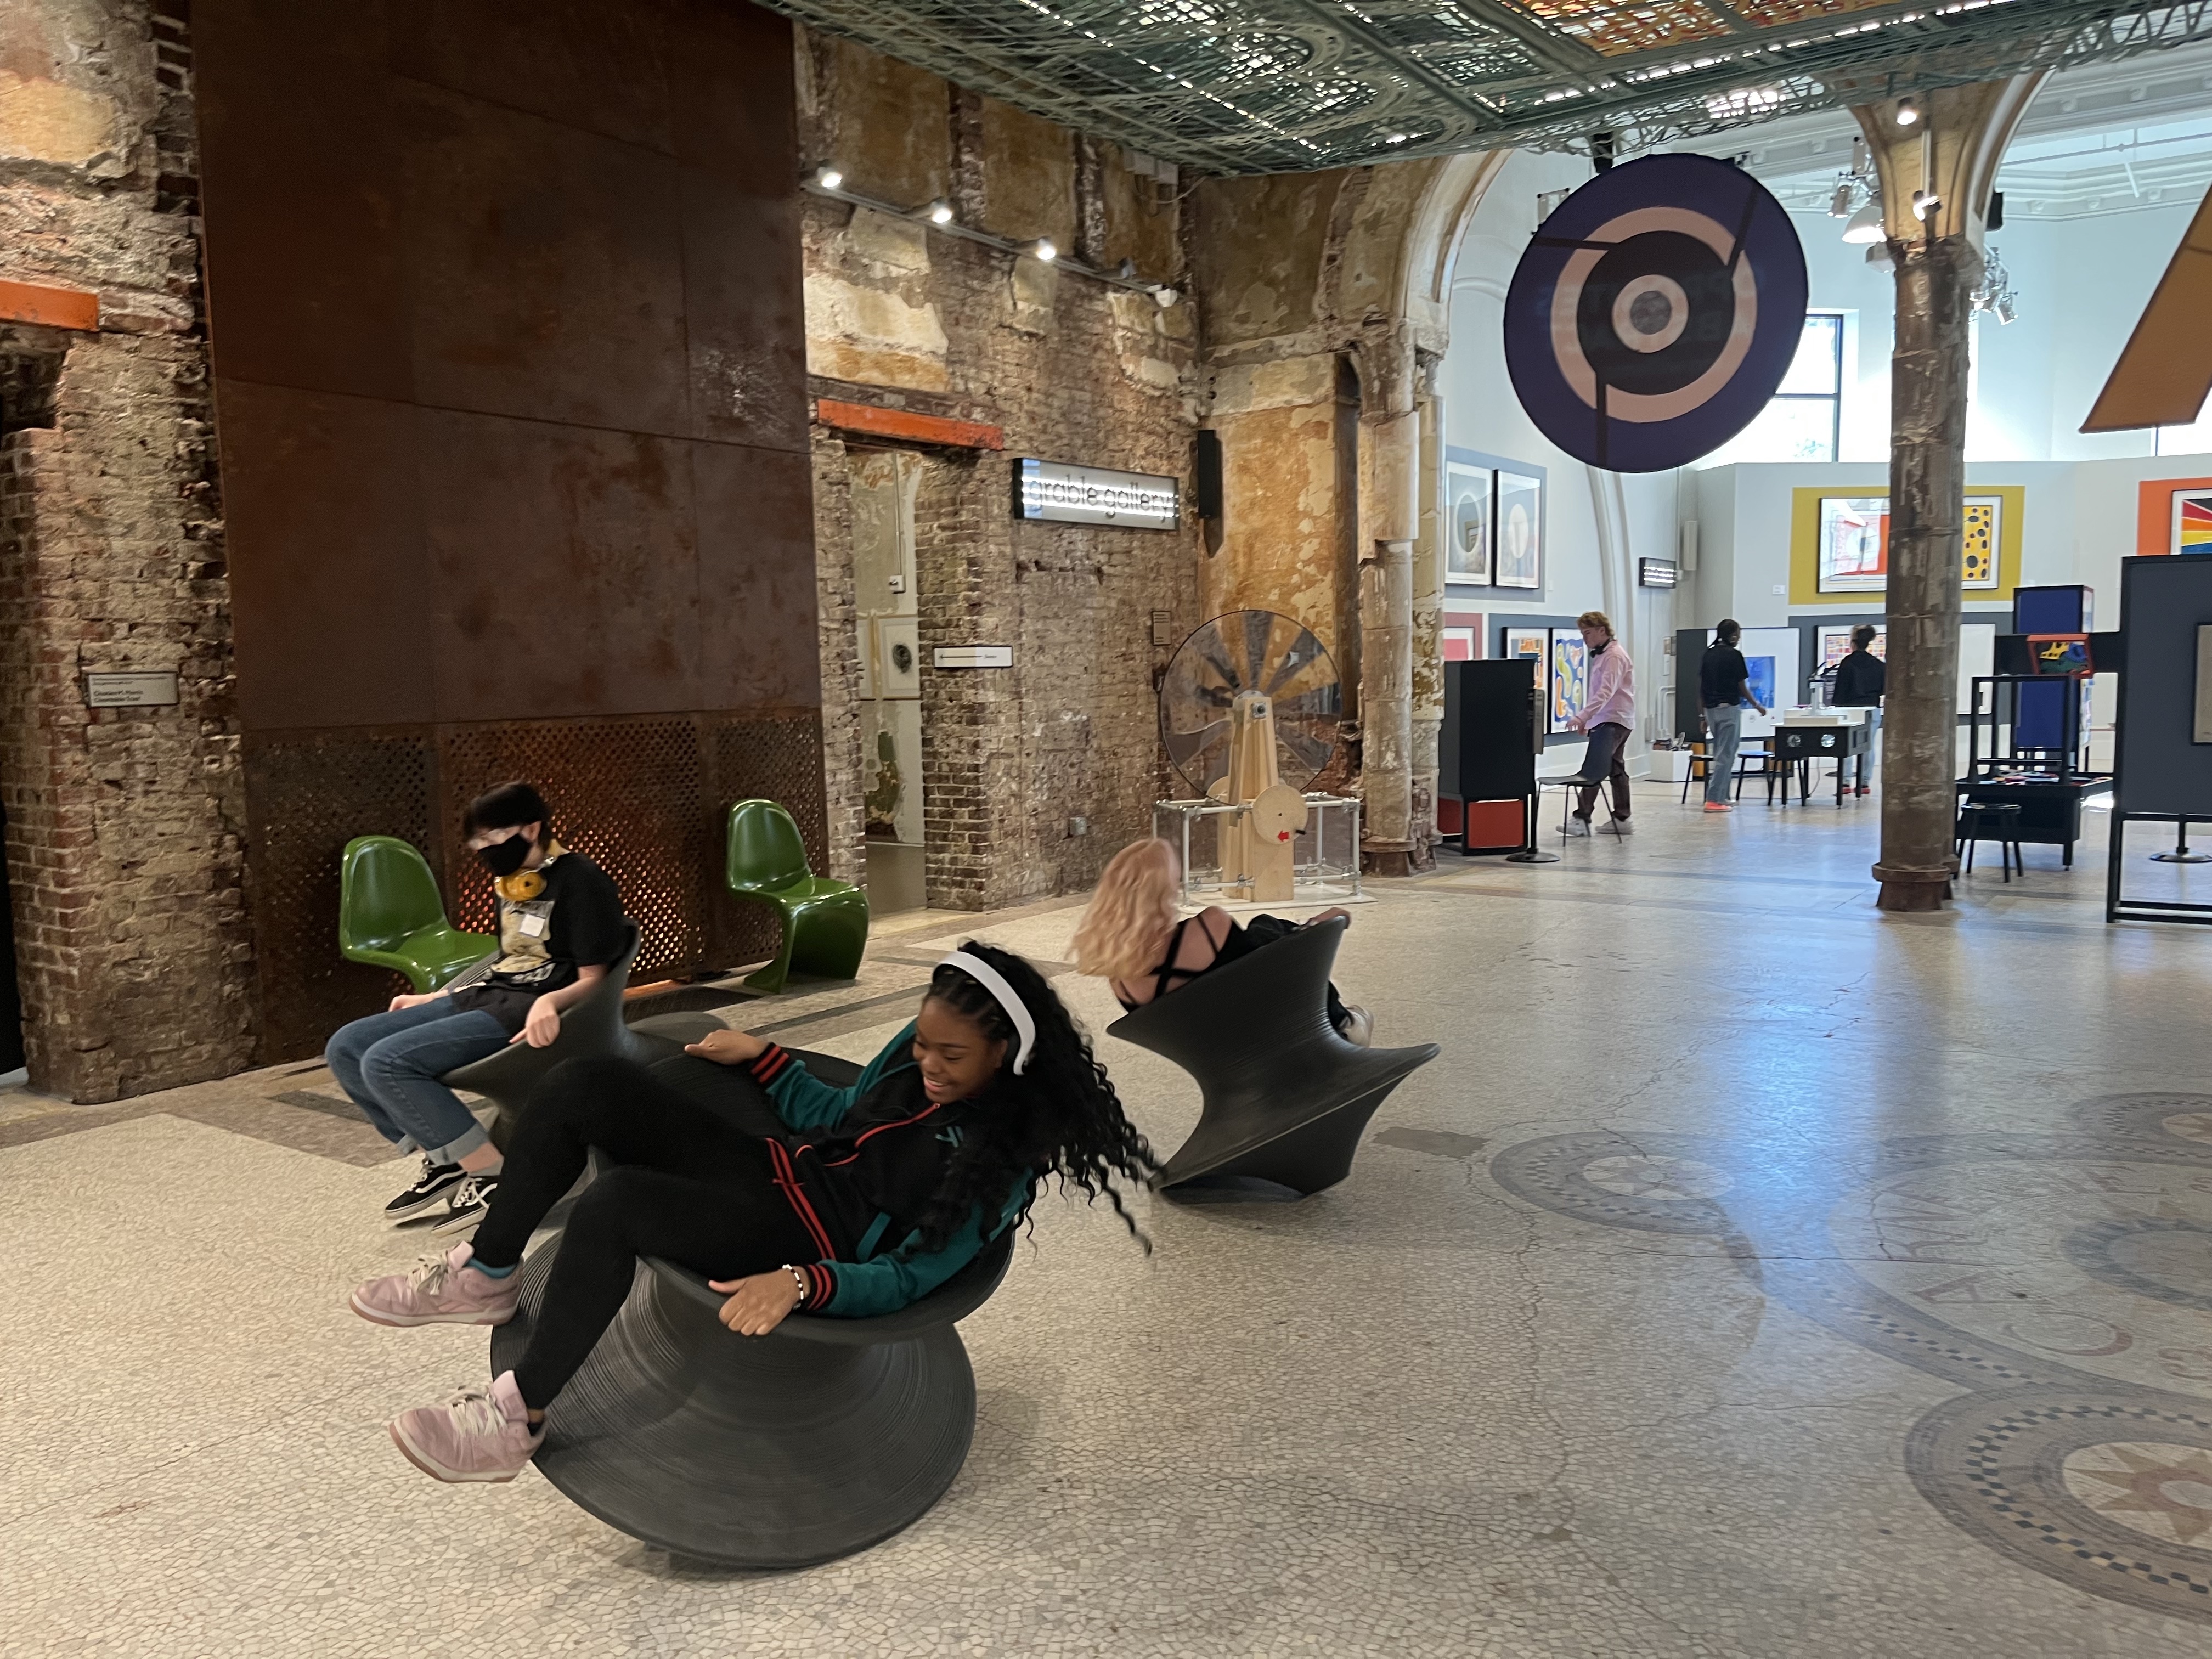 Students laughing as they swivel on spun chairs in MuseumLab